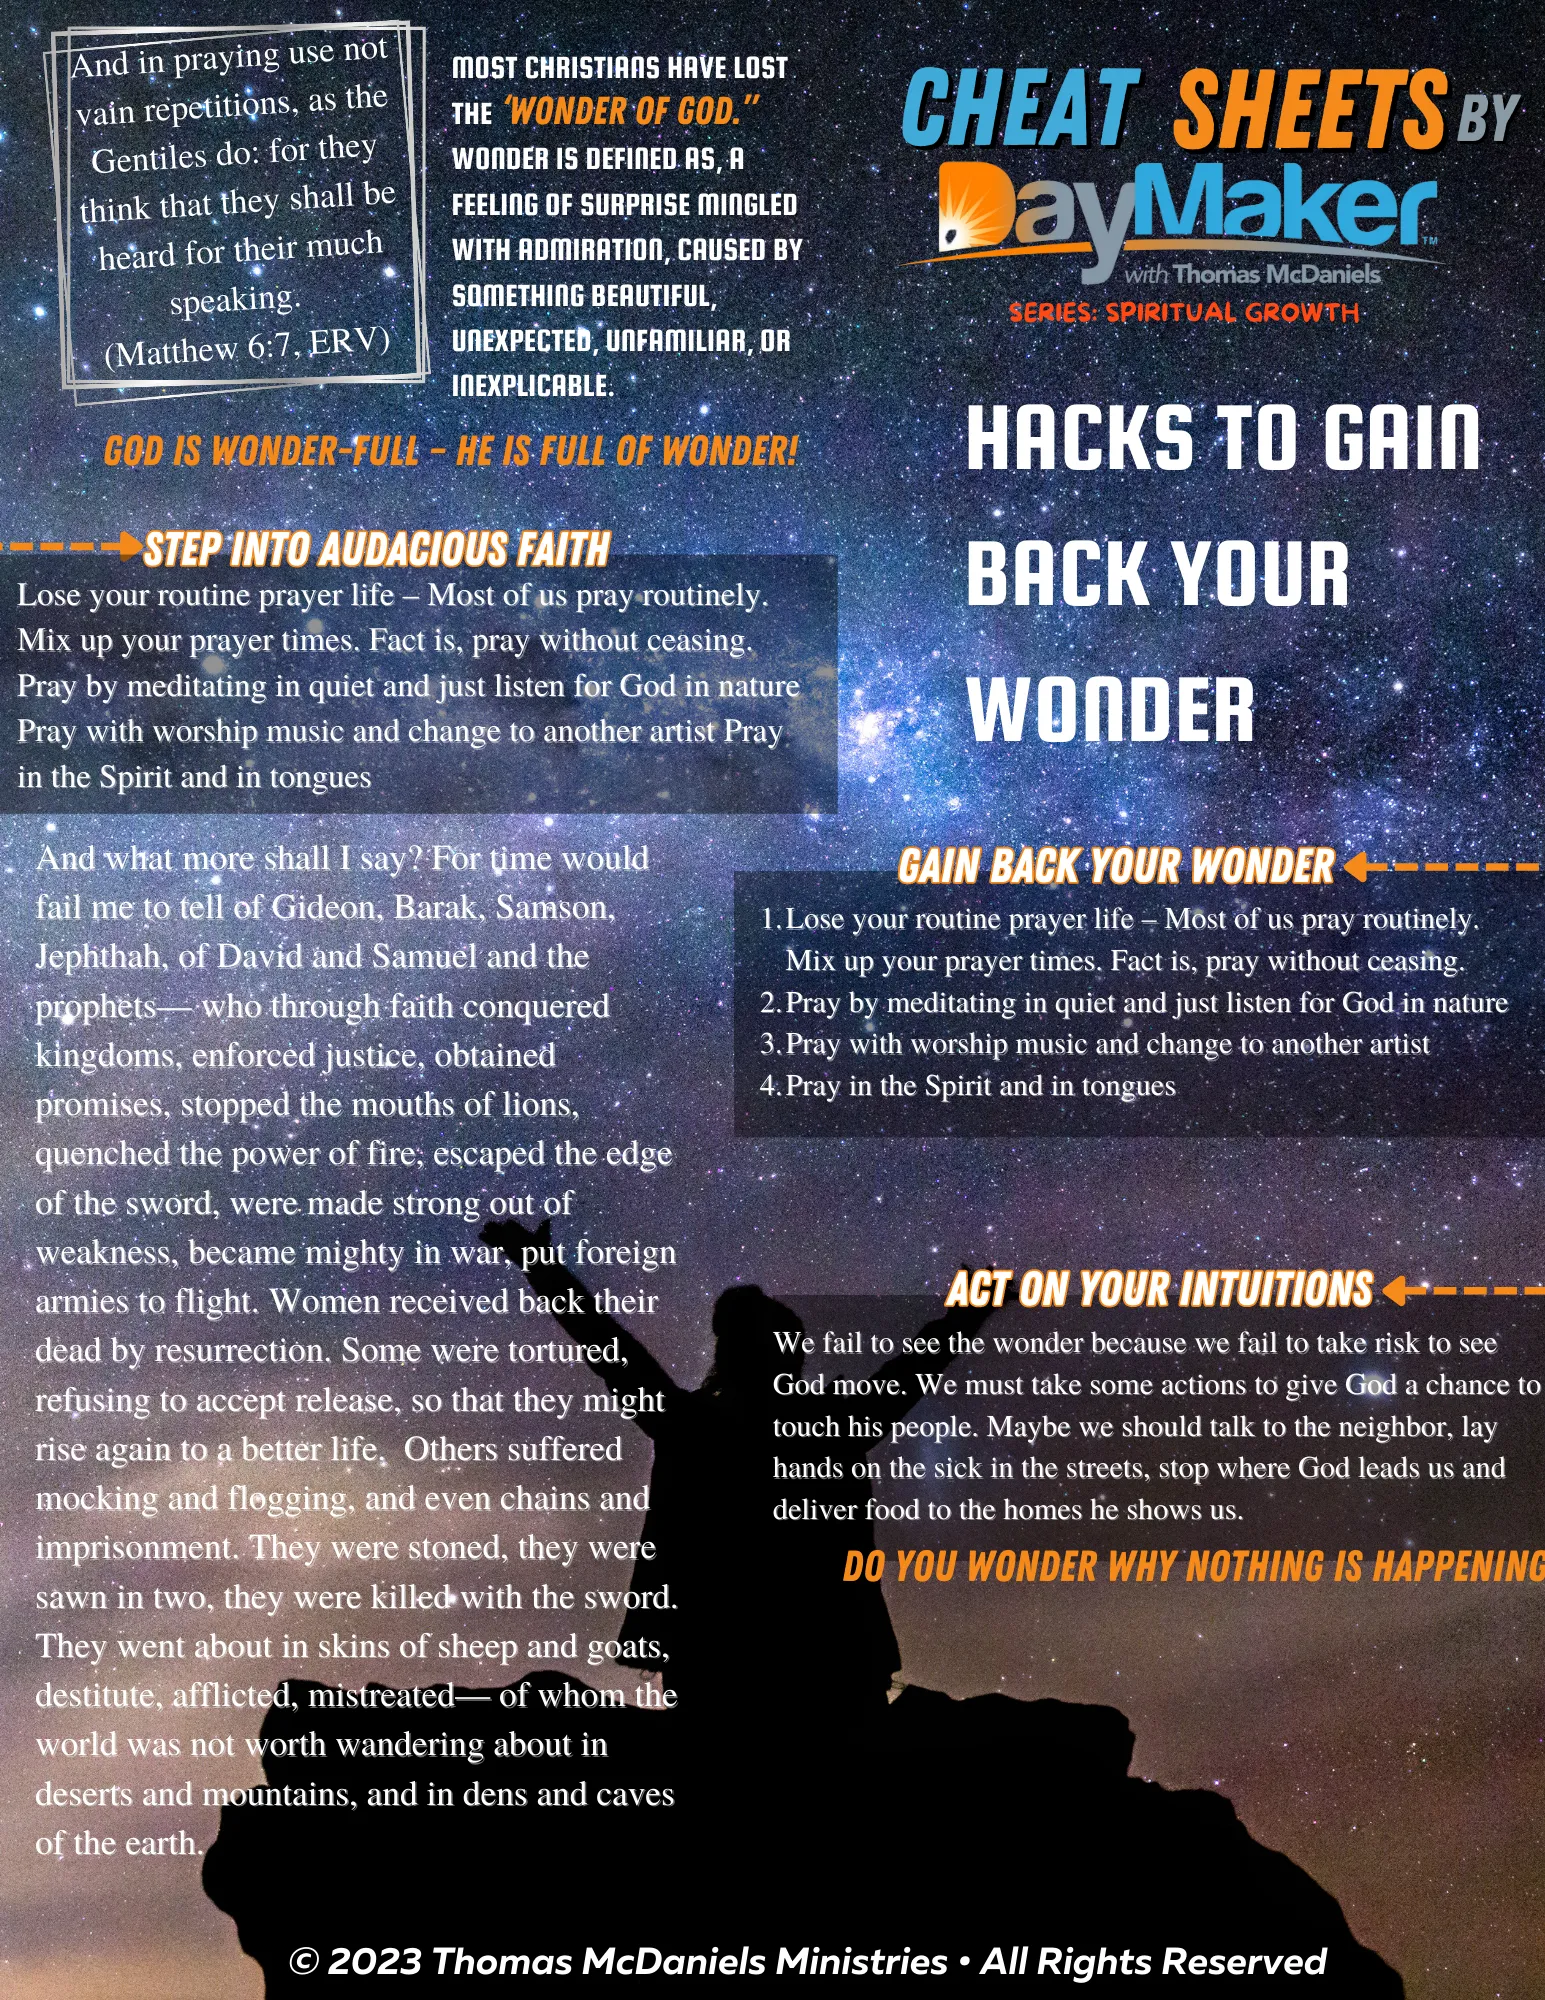 Cheat Sheets By DayMaker ~ Hacks to Gain Back Your WONDER  